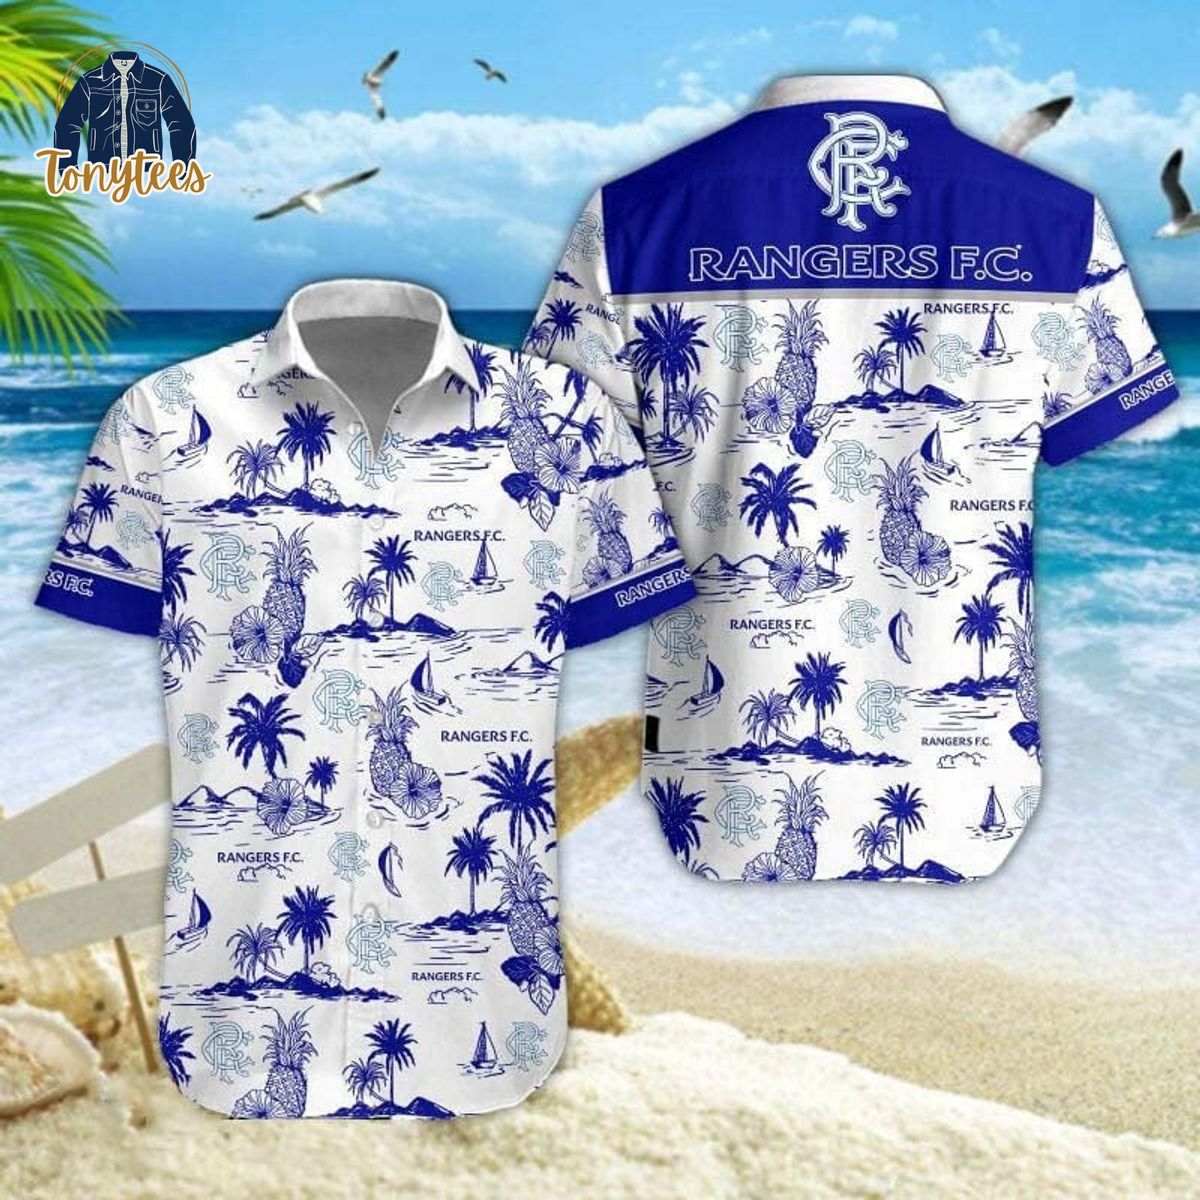 🌺 Introducing our new Ranger FC Tropical Hawaiian Shirt! 🌴 Perfect for summer vibes! Available now on Toneytees store. #SummerFashion #TropicalVibes
Buy link: tonytees.com/product/ranger…